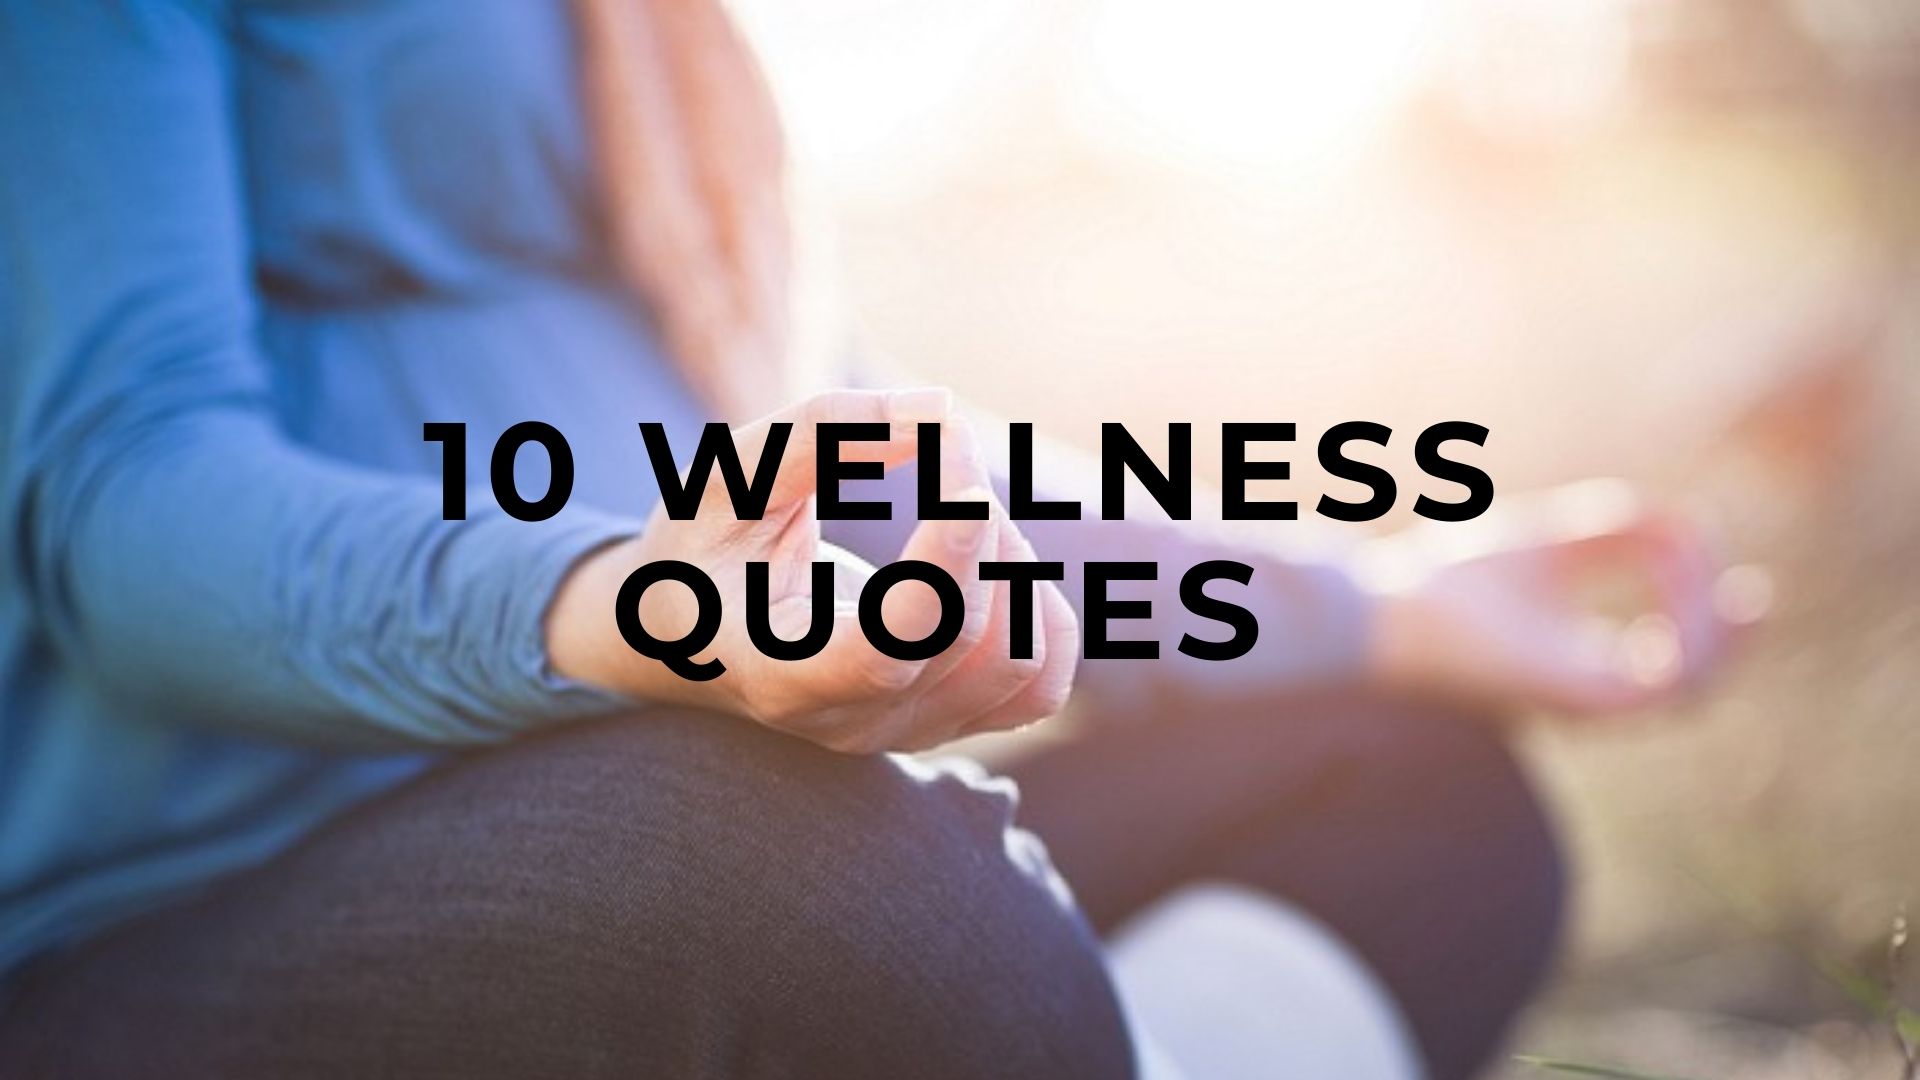 health and wellness quotes